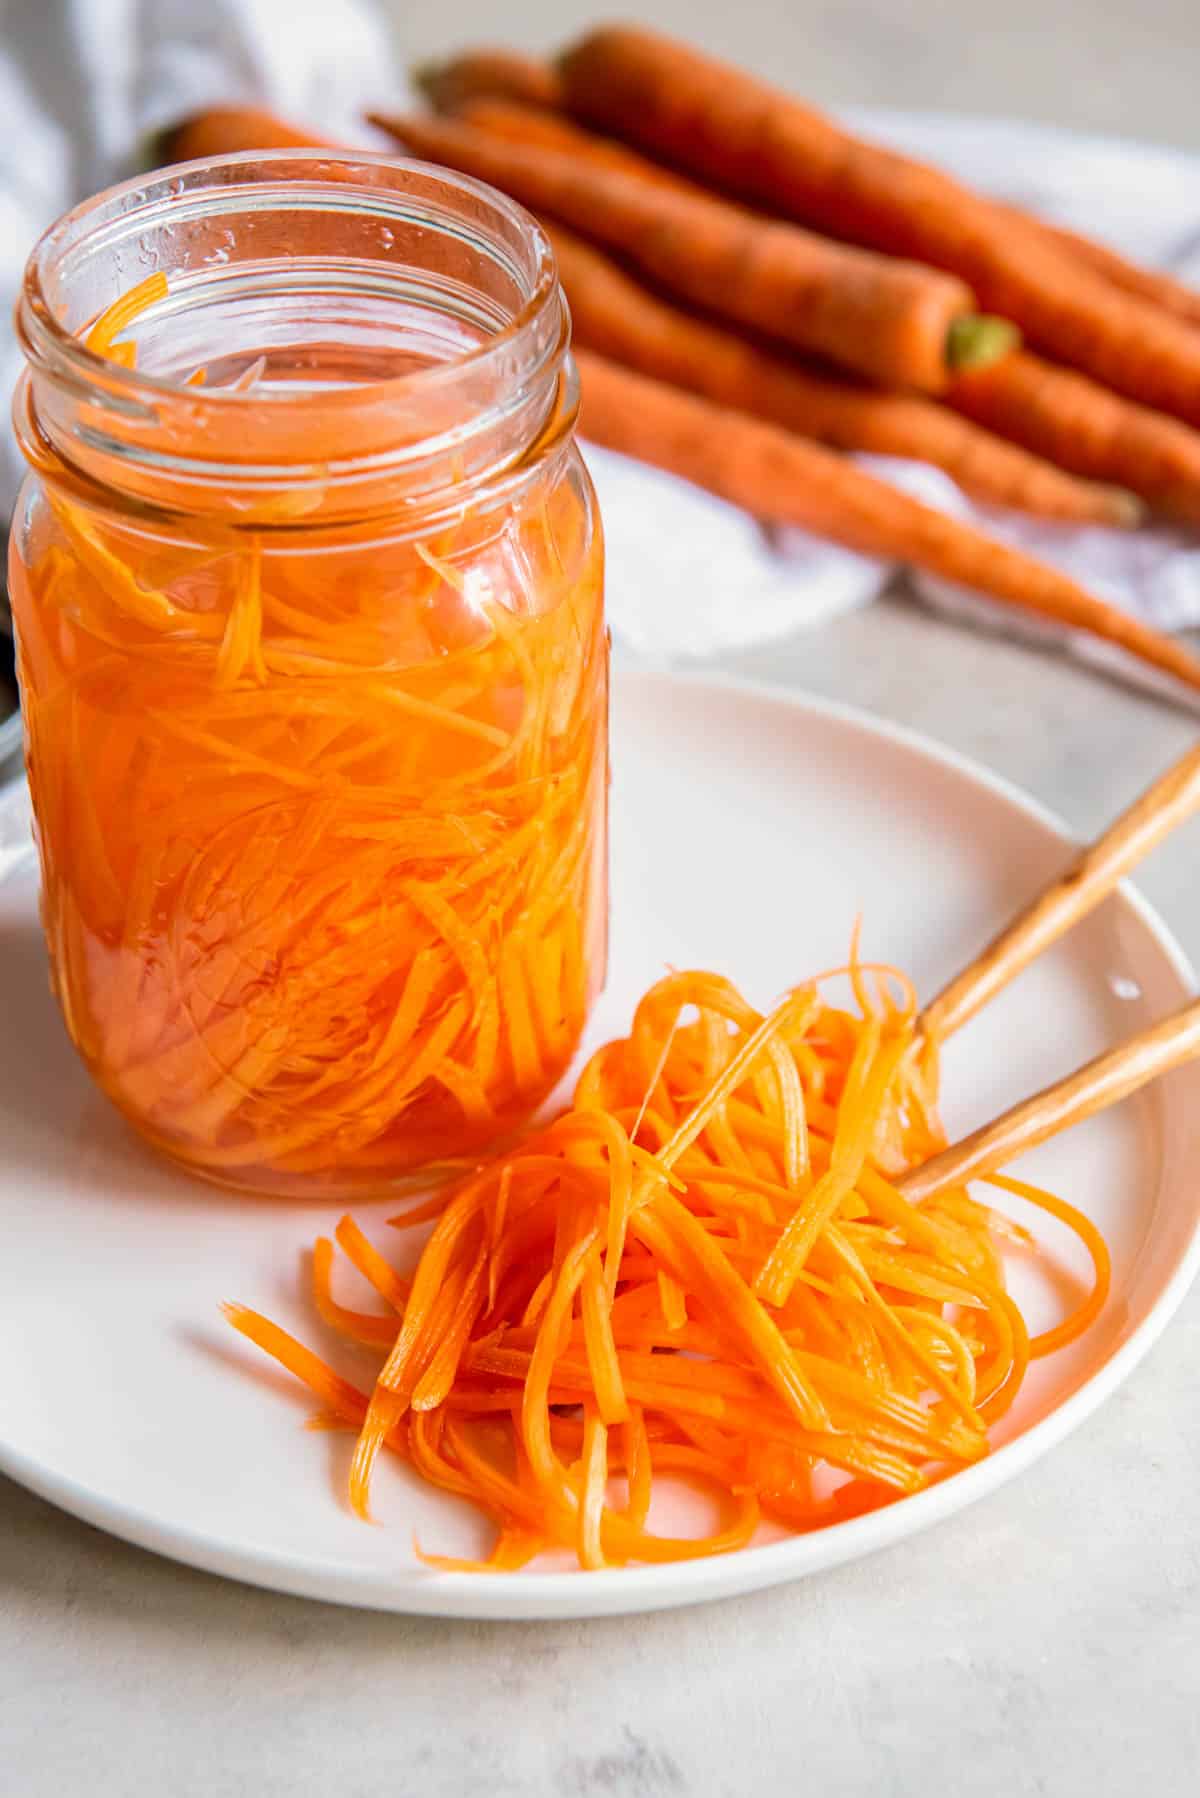 Shredded pickled carrots side on a white plate on a white countertop. The remaining jar of pickled carrots sits off to the side.